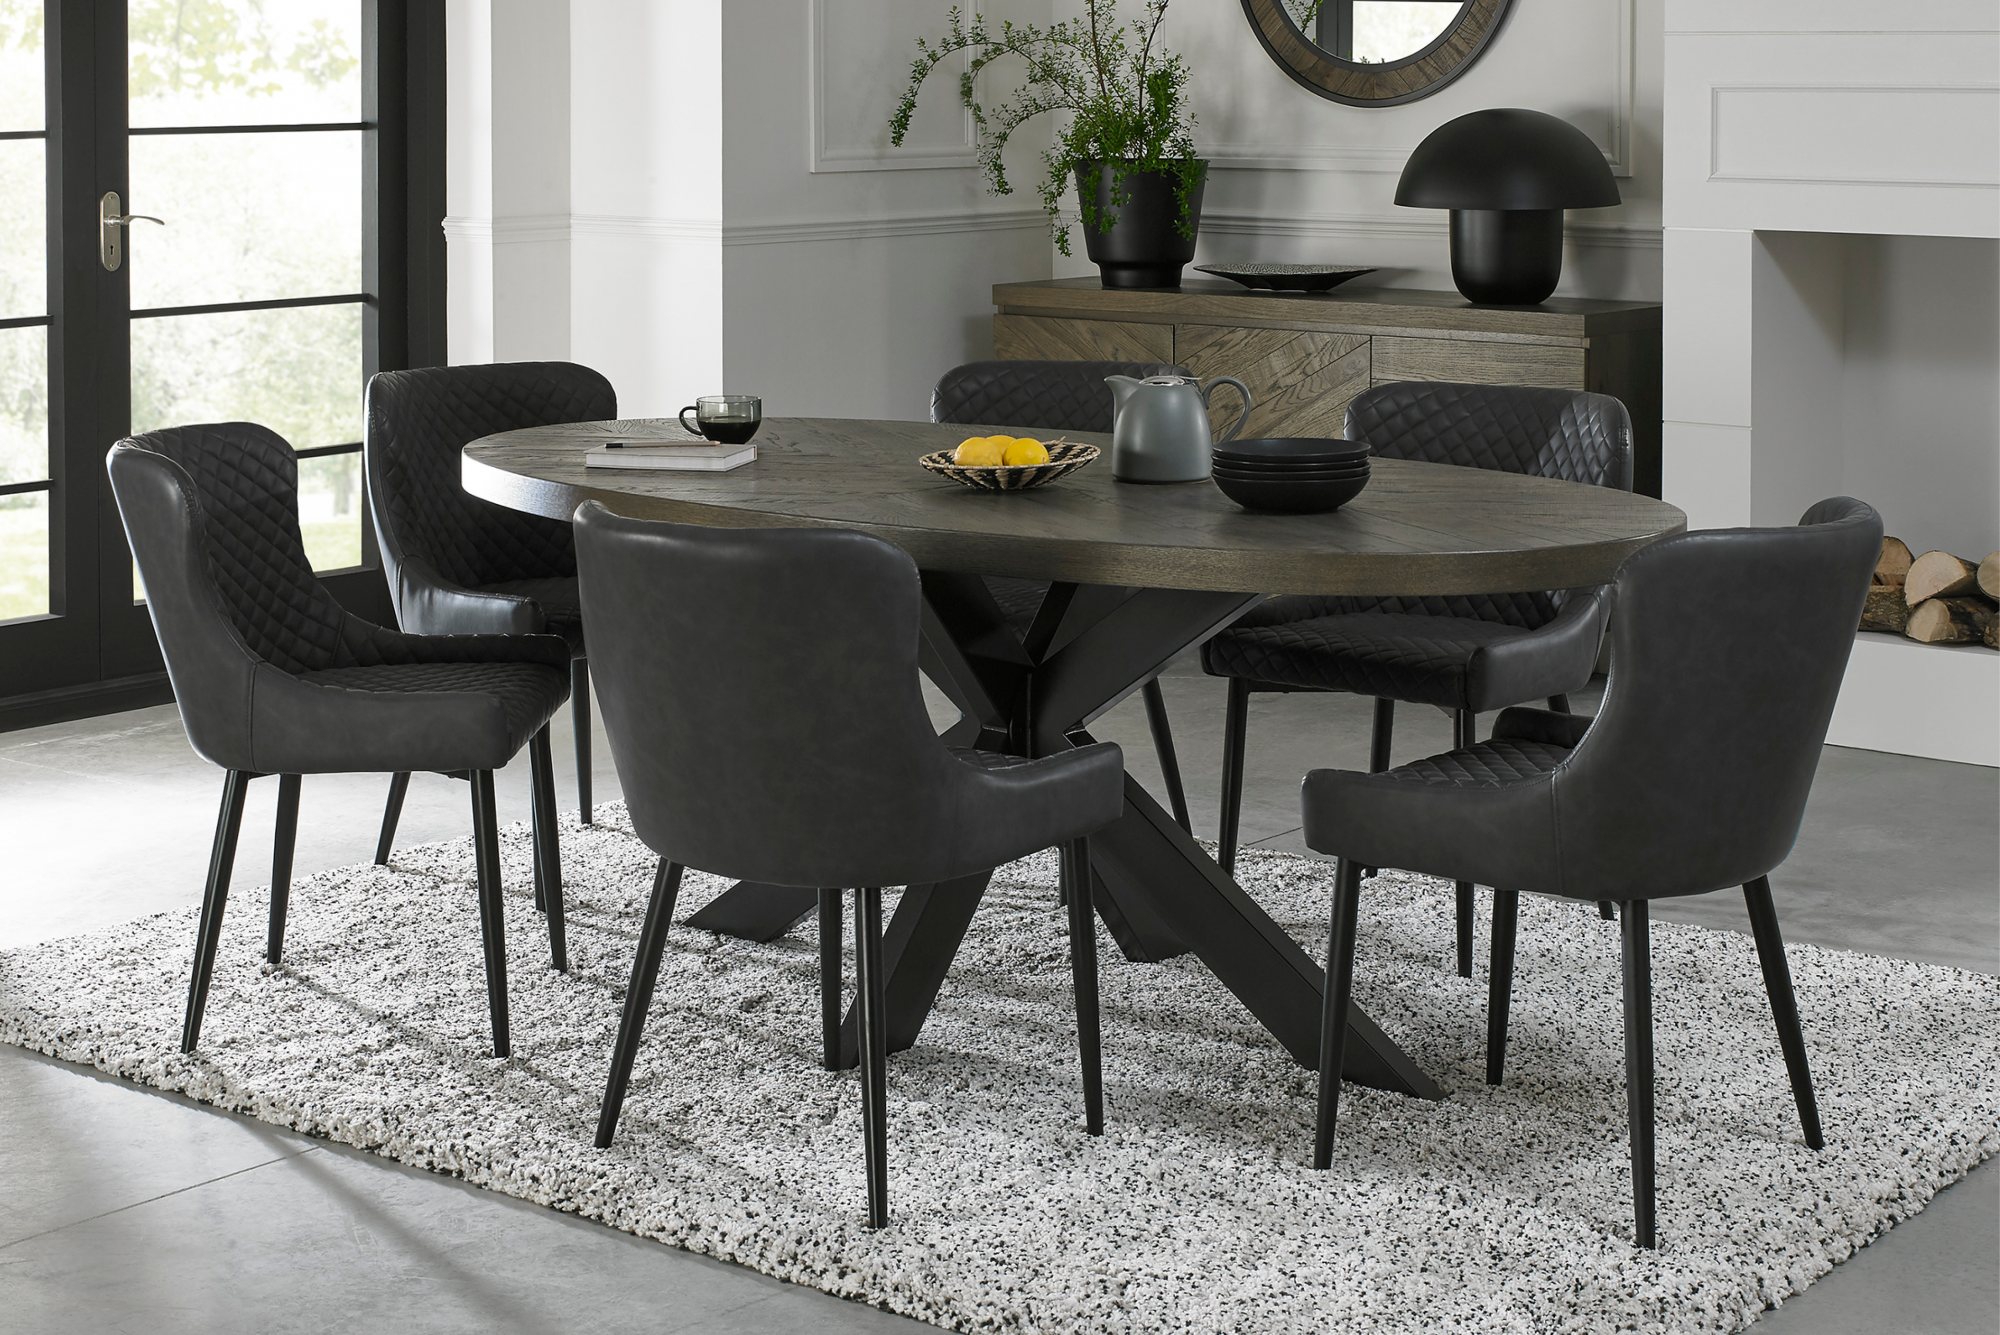 Home Origins Bosco fumed oak 6 seater dining table with 6 Cezanne chairs- dark grey faux leather